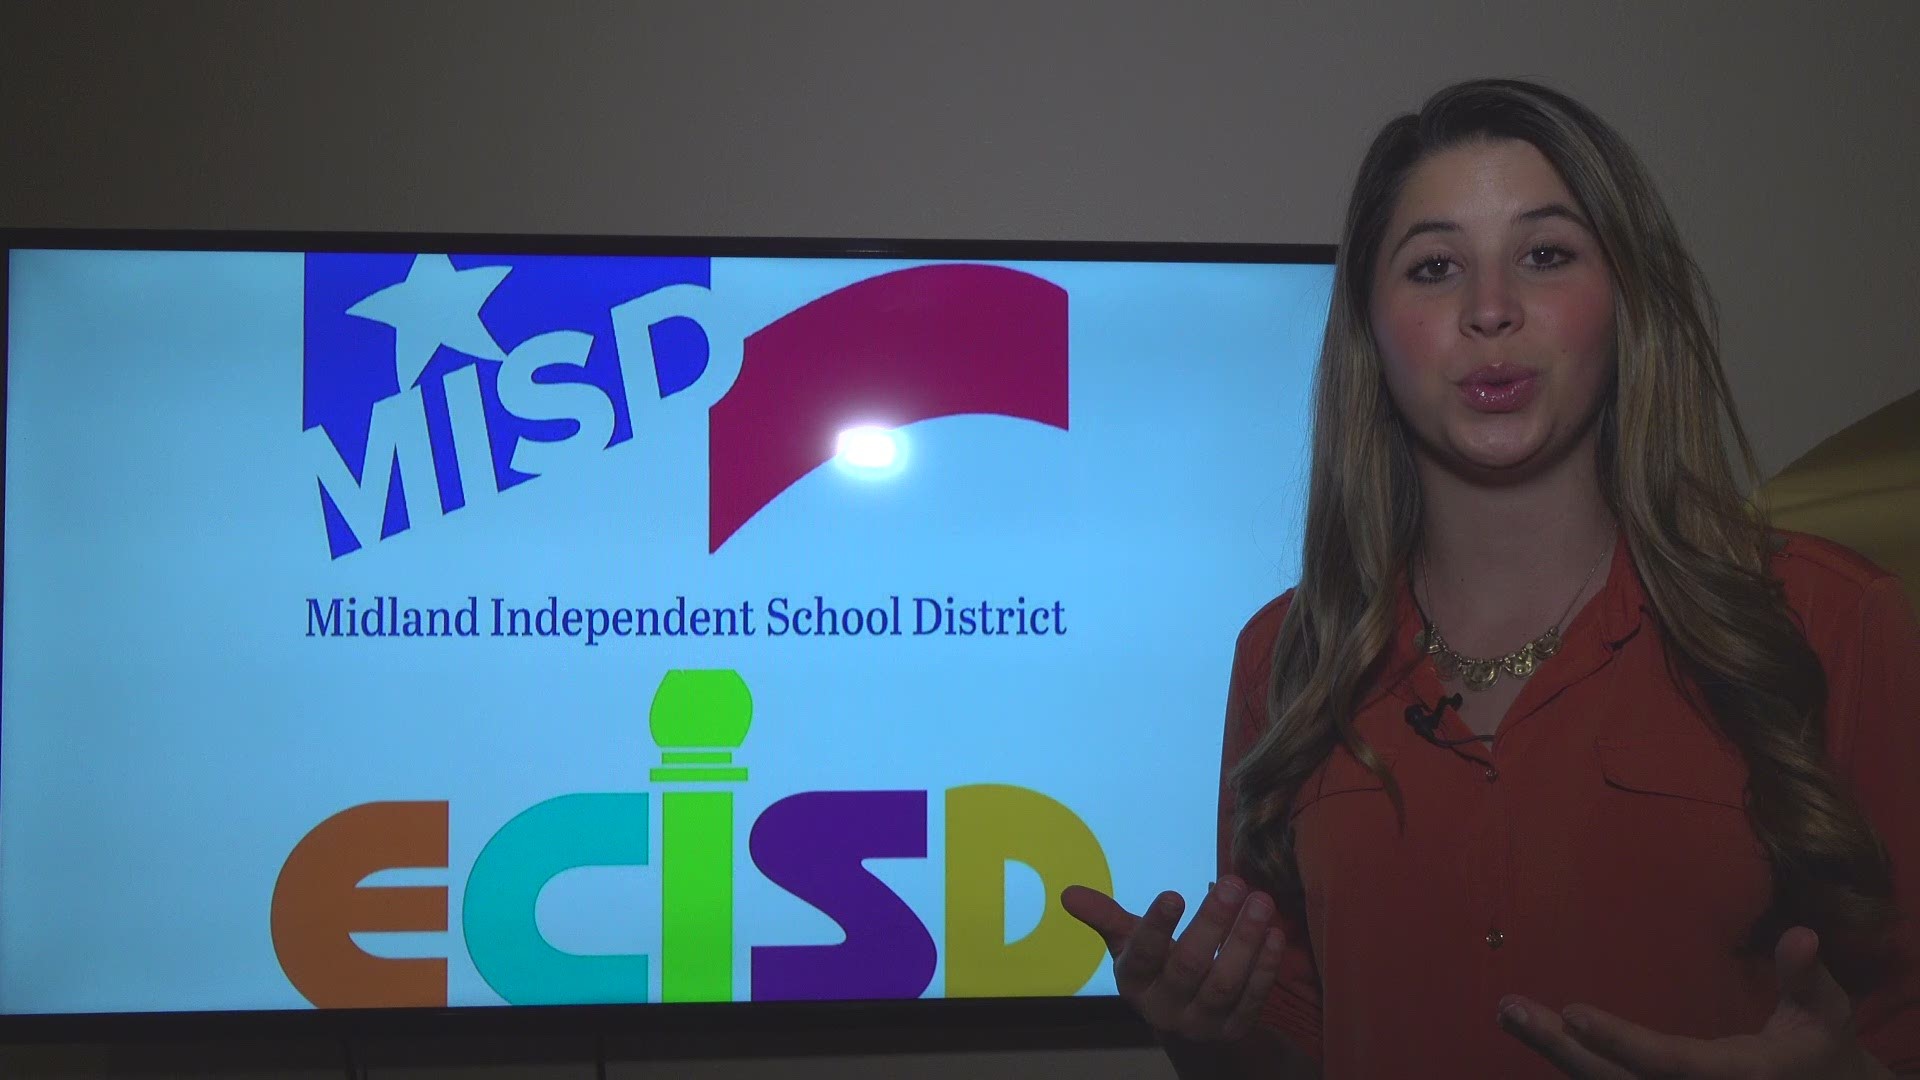 "The only thing that we are keeping in mind is that we want the system that we select to be the most equitable solution for all students," Lilia Nanez said.